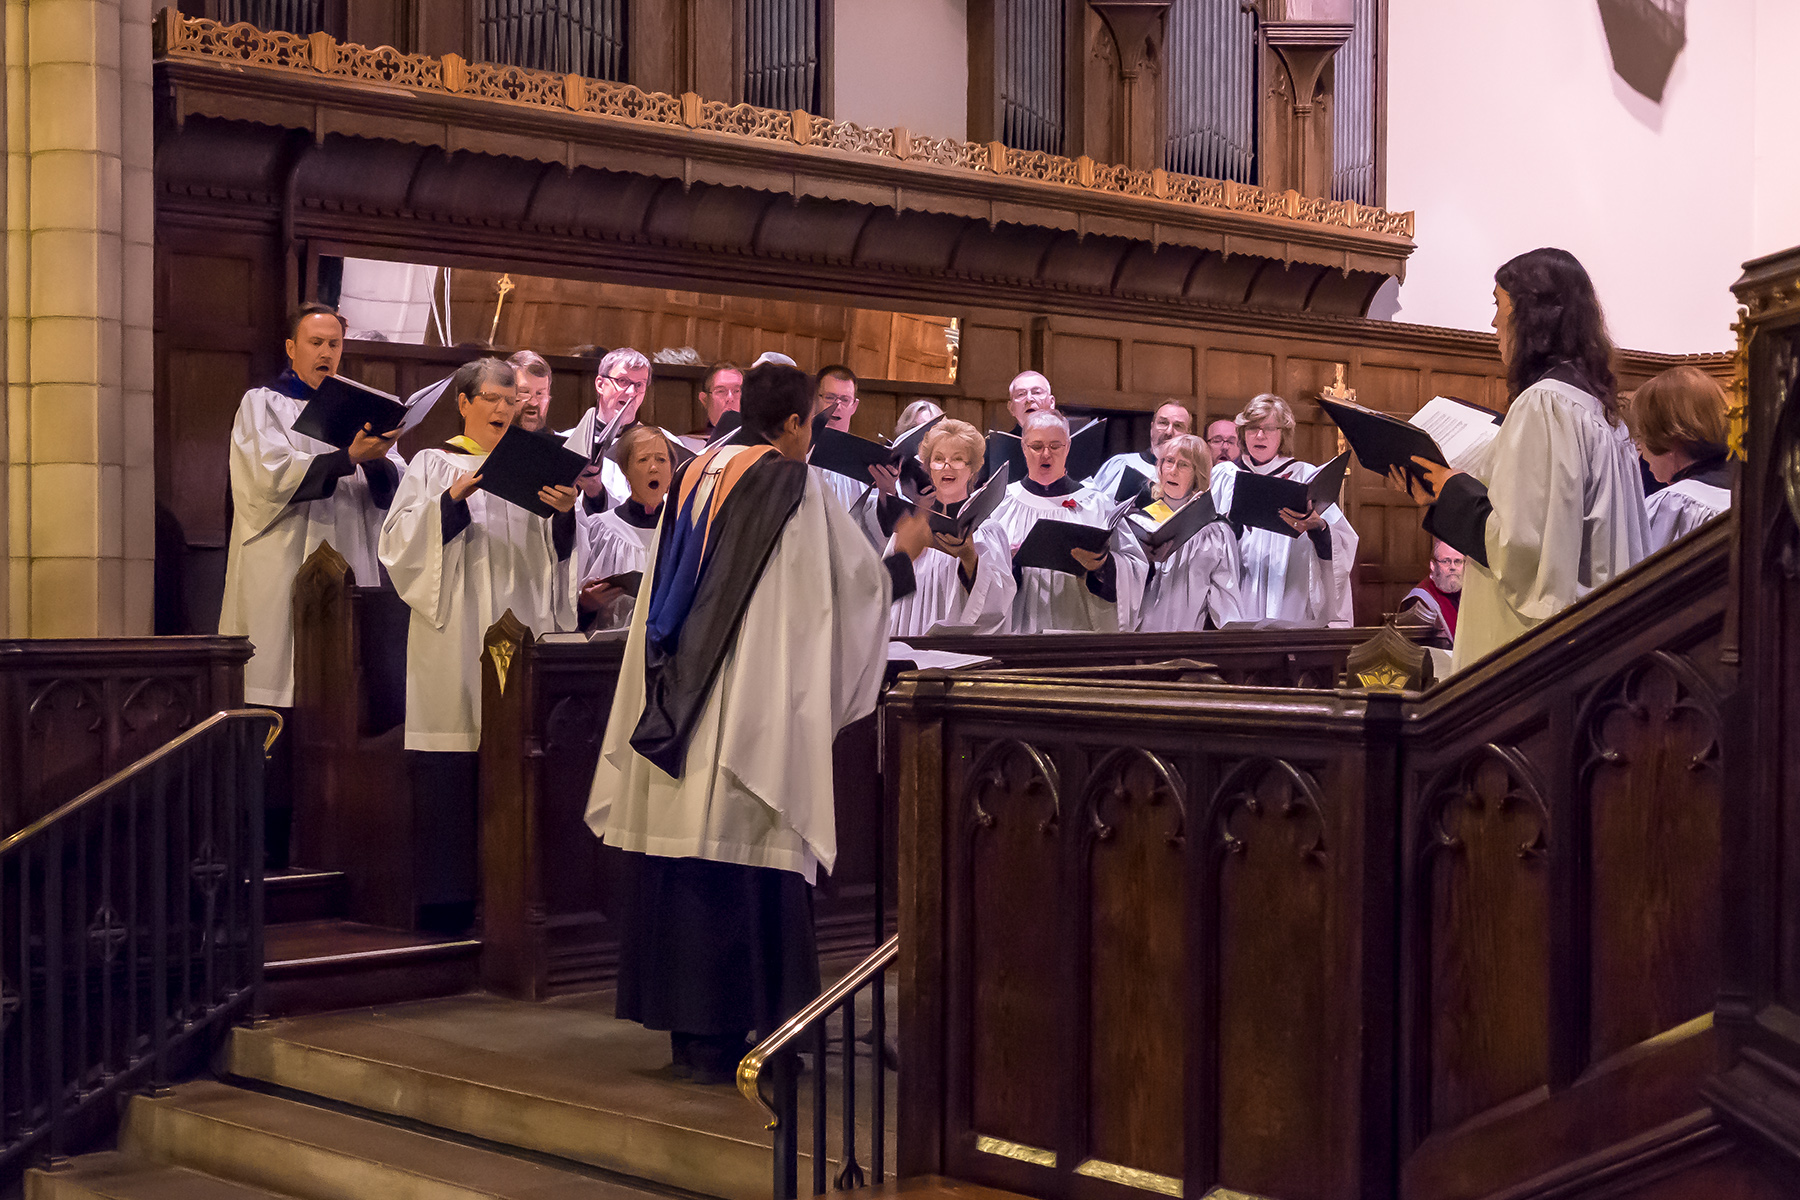 Simon conducting the choir of Grace and St. Stephen's Episcopal Church, Colorado Springs